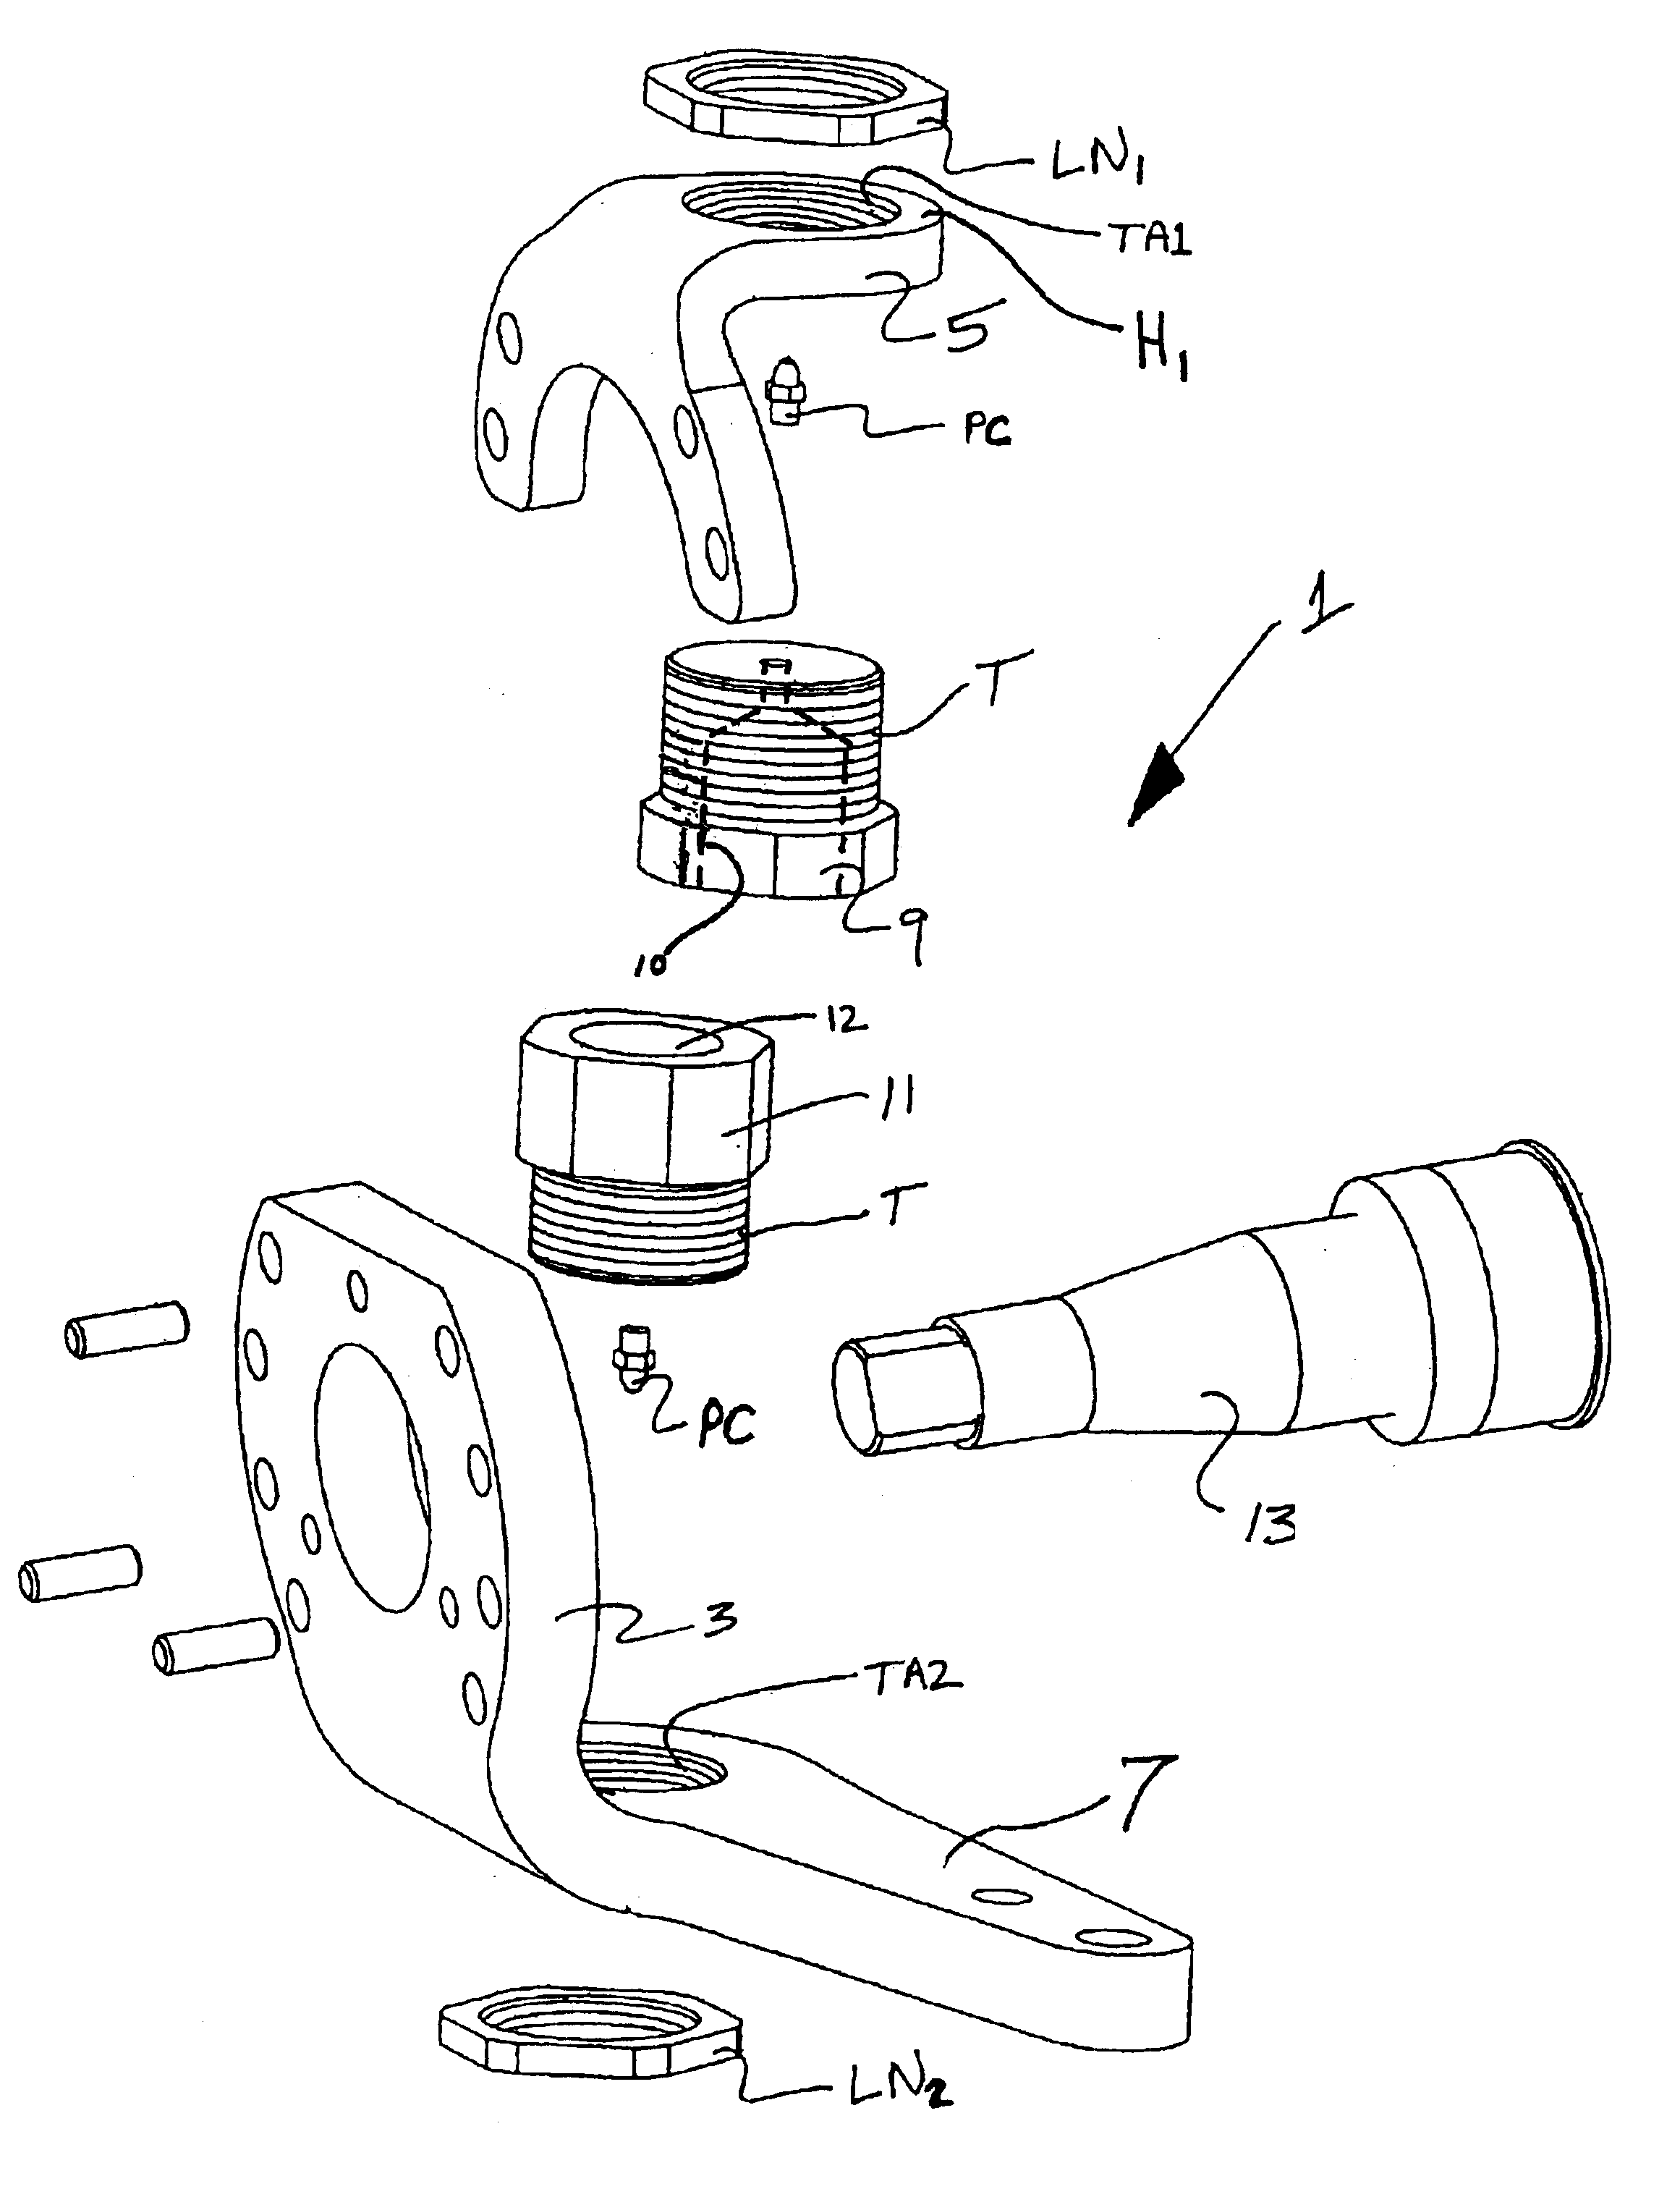 Steering knuckle and adjustable boss